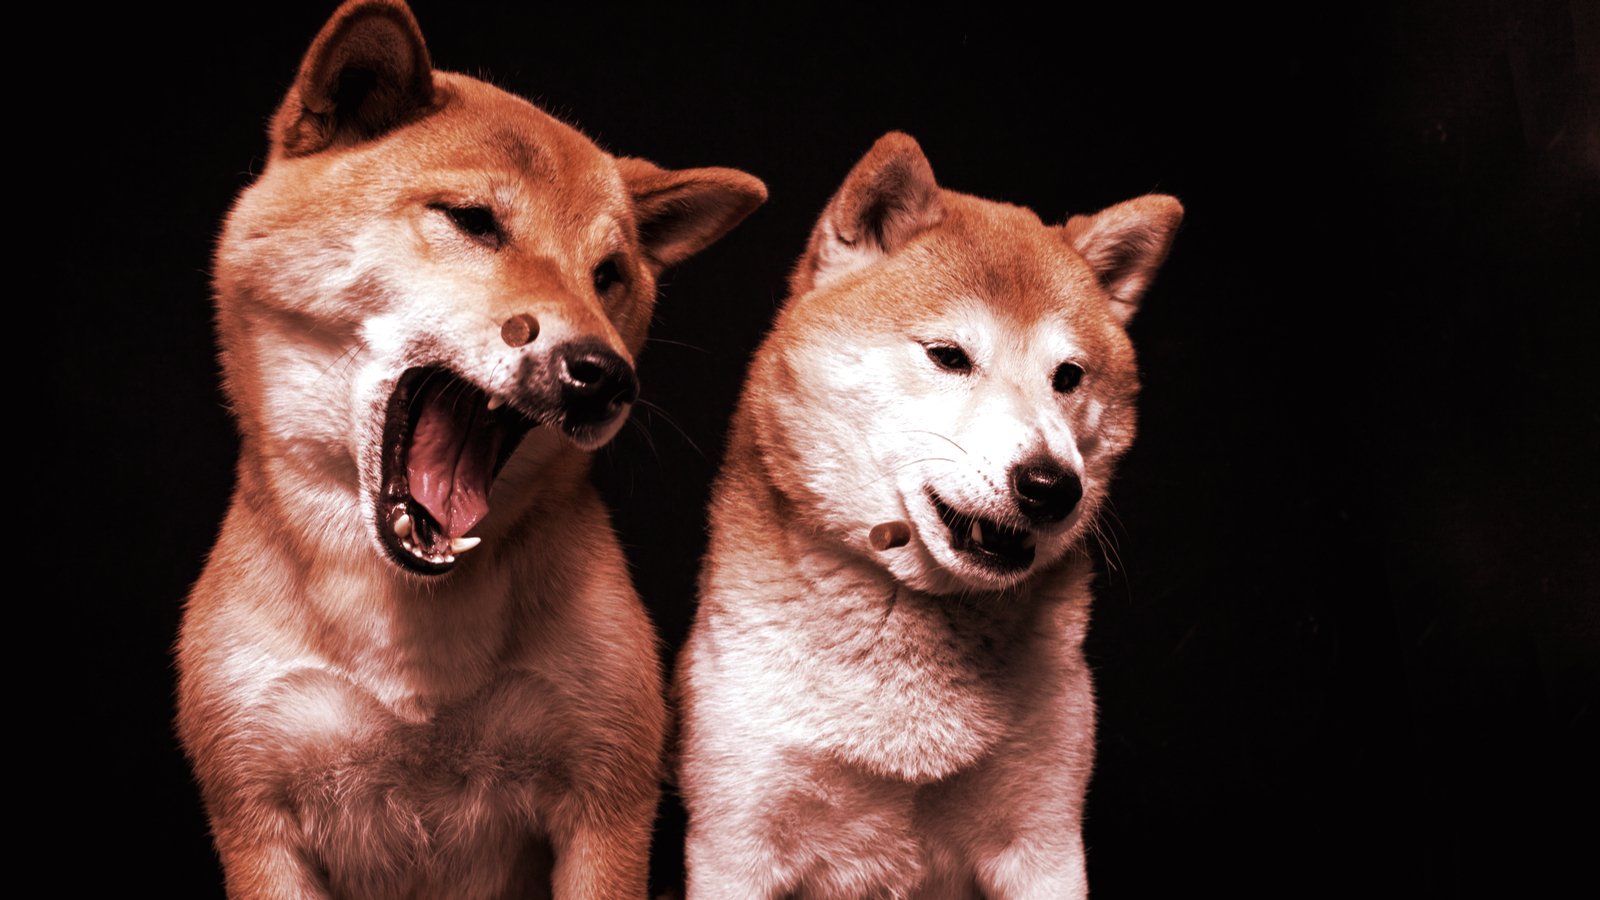 Meme Coins Dogecoin, Shiba Inu Mount Double-Digit Recovery Amid Crypto Rebound